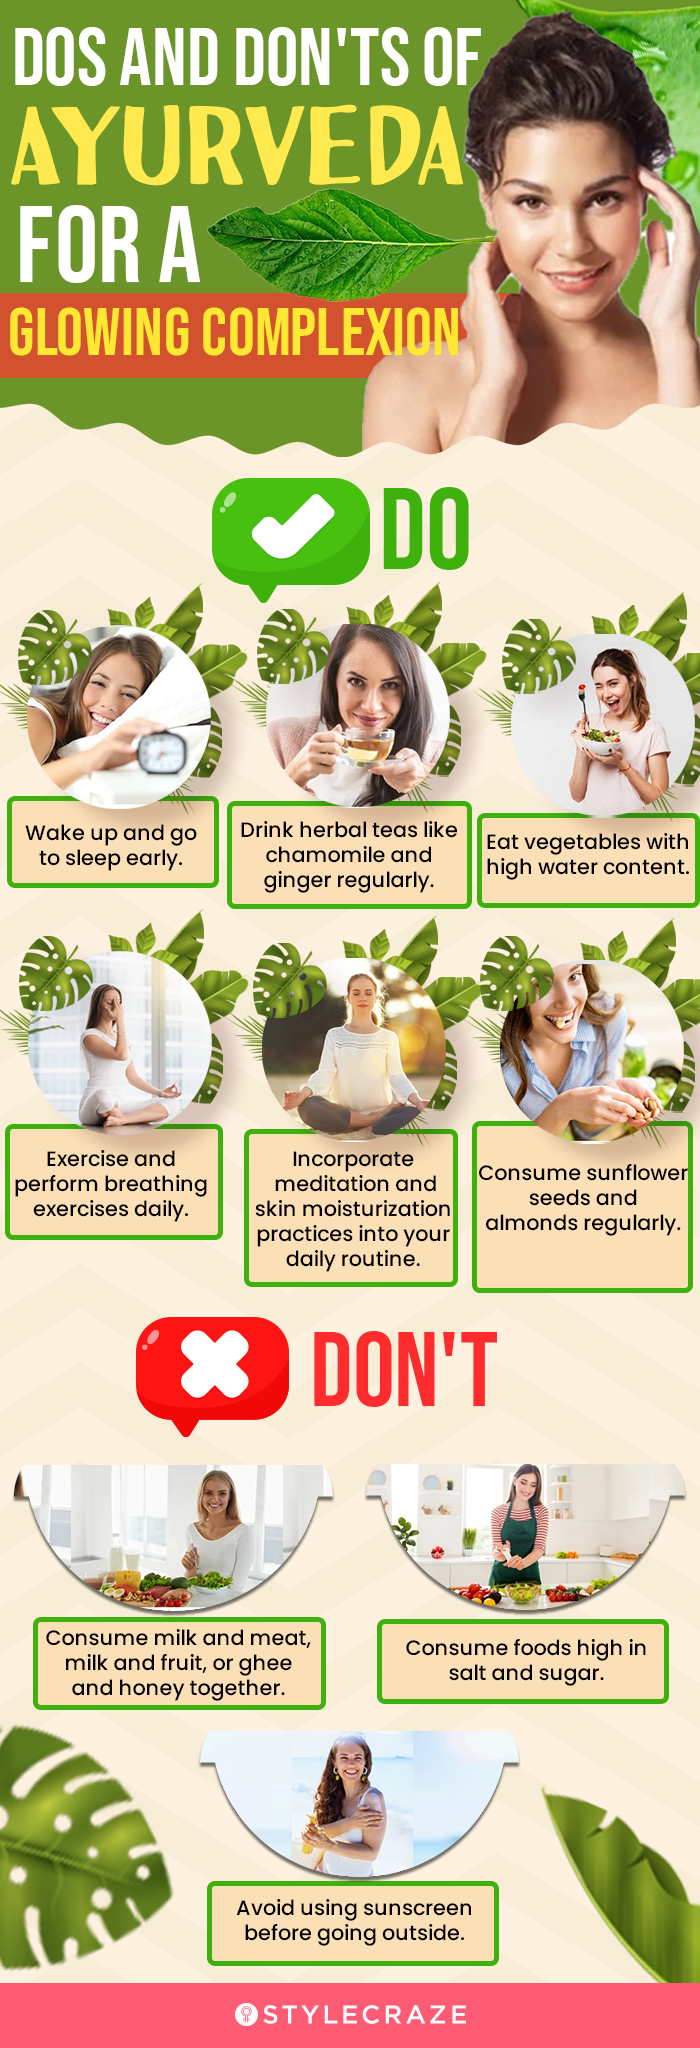 dos and don'ts of ayurveda for a glowing complexion (infographic)